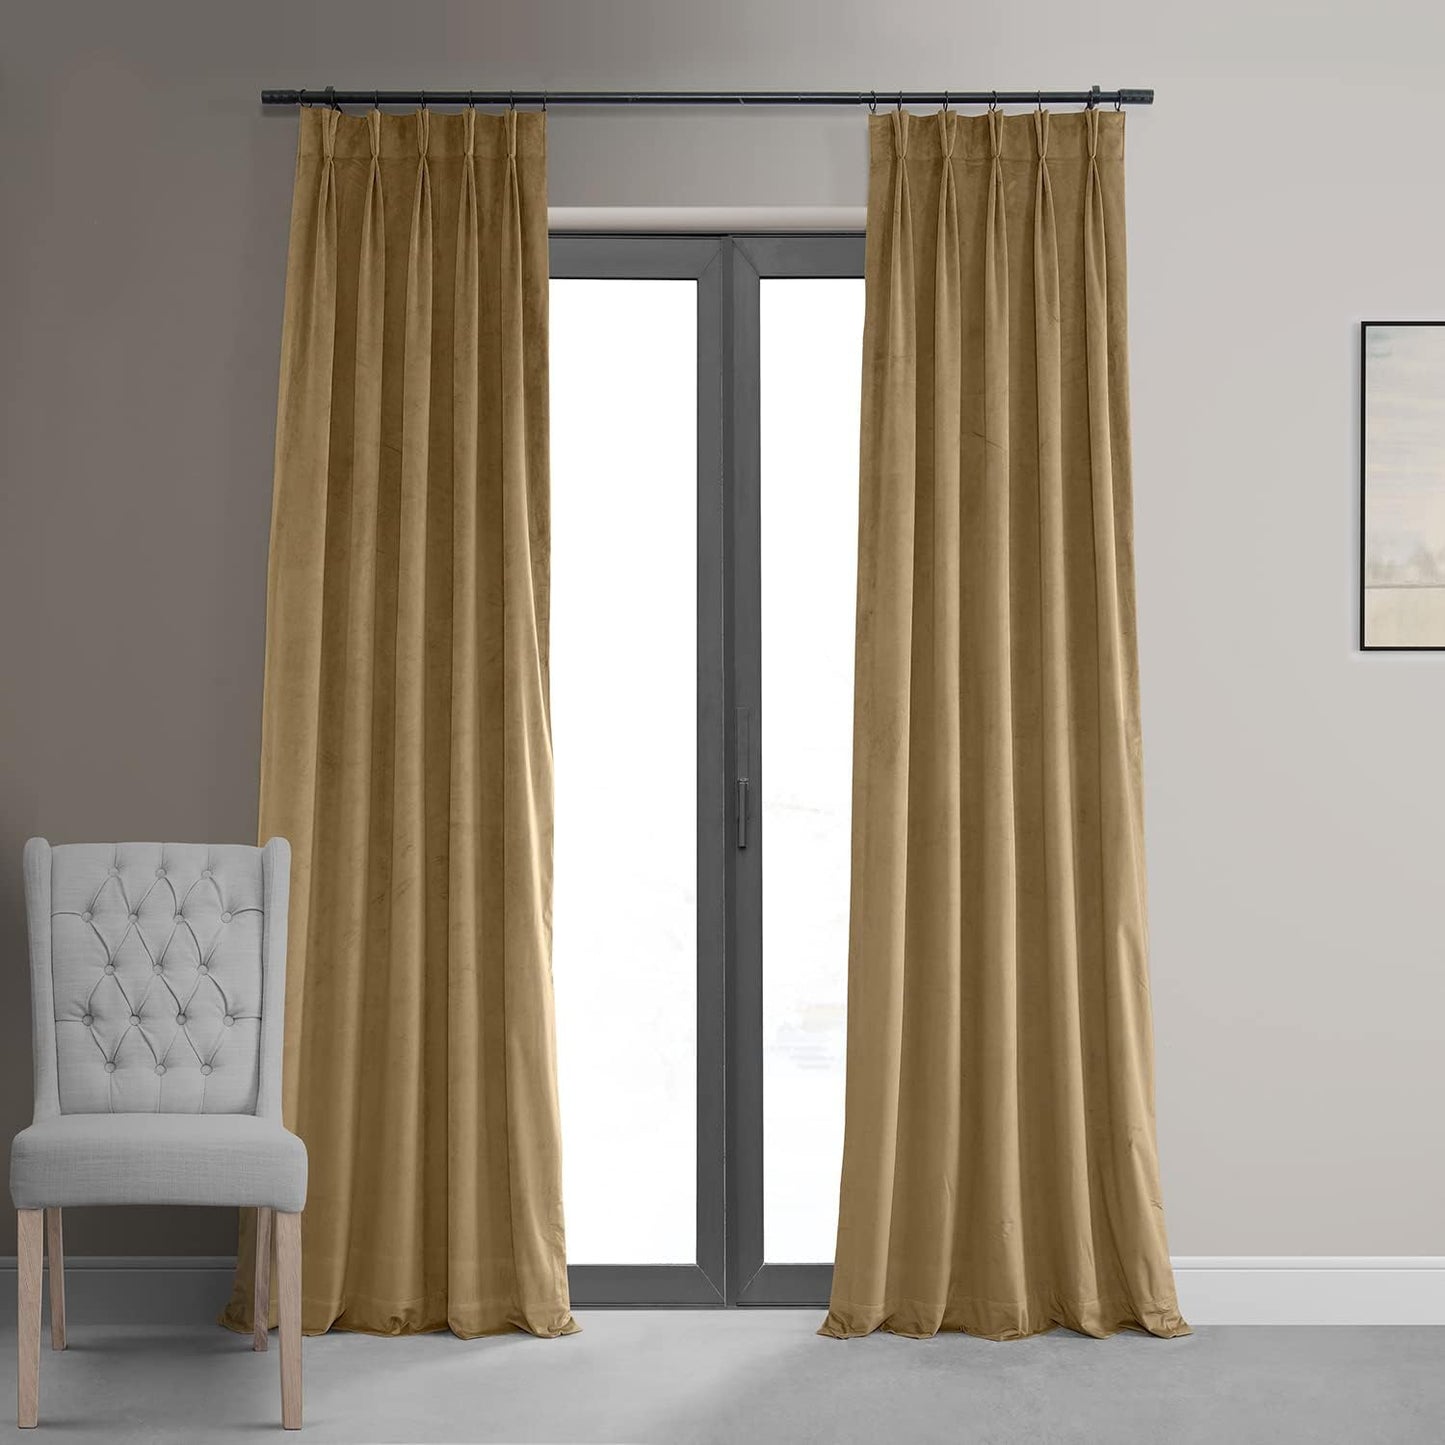 HPD Half Price Drapes Velvet Blackout Curtains/Drapes - 96 Inches Long 1 Panel Blackout Curtain Signature Pleated for Living Room & Bedroom - 25W X 96L, Porcelain White  Exclusive Fabrics & Furnishings Amber Gold 25W X 108L 